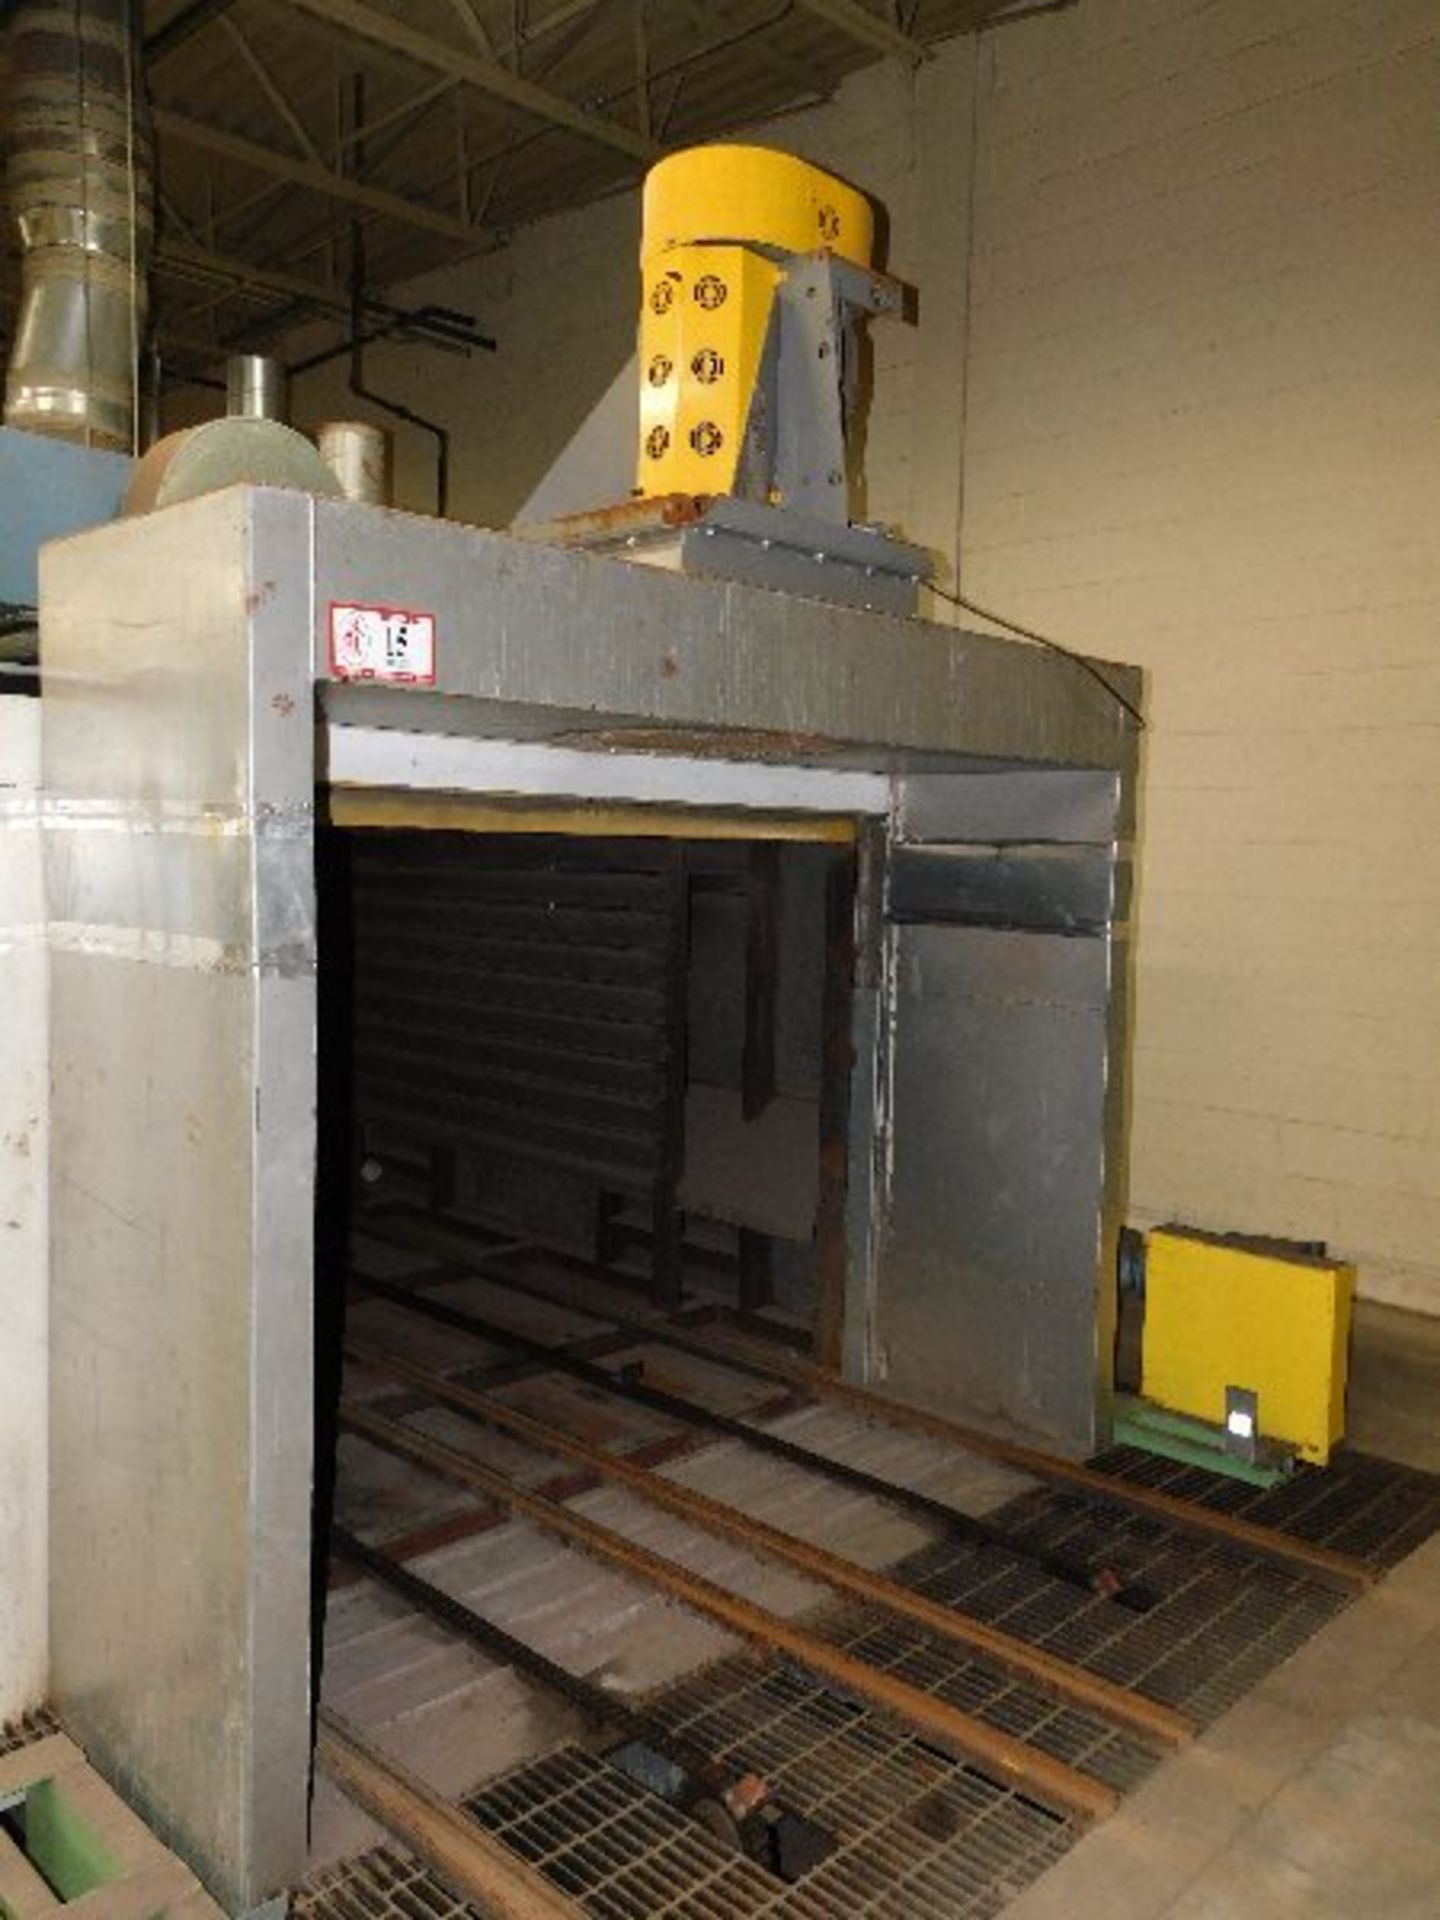 Maxon 40' Curing Oven, Dual Control, S-Fired, 6' X 5' Open, W/Chain Drive Conveyor - Image 4 of 12